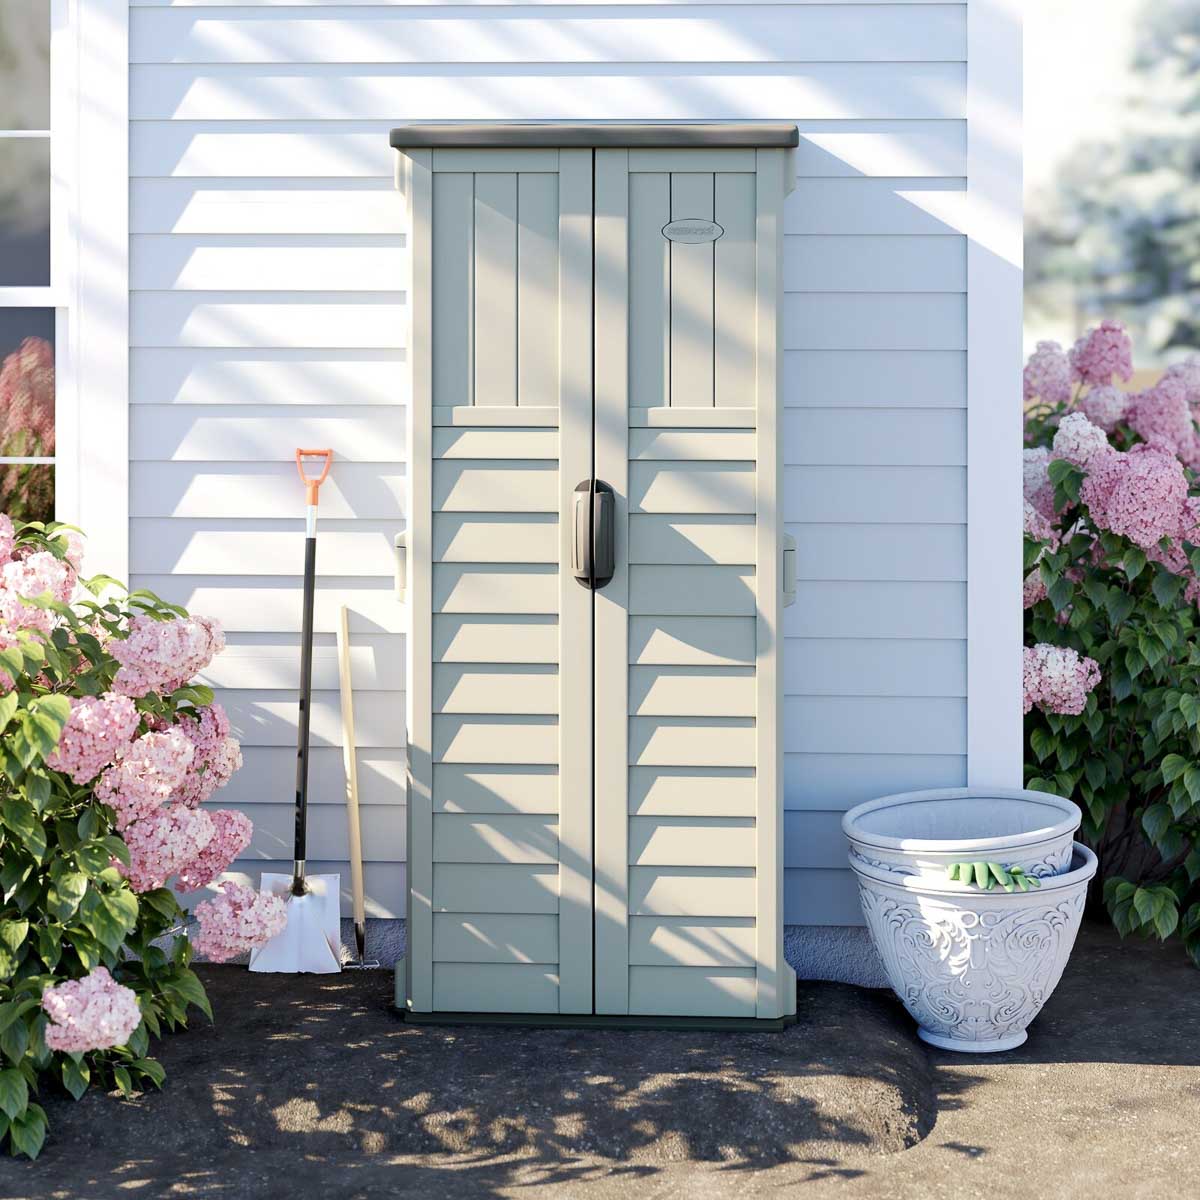 Tool shed for additional outdoor storage